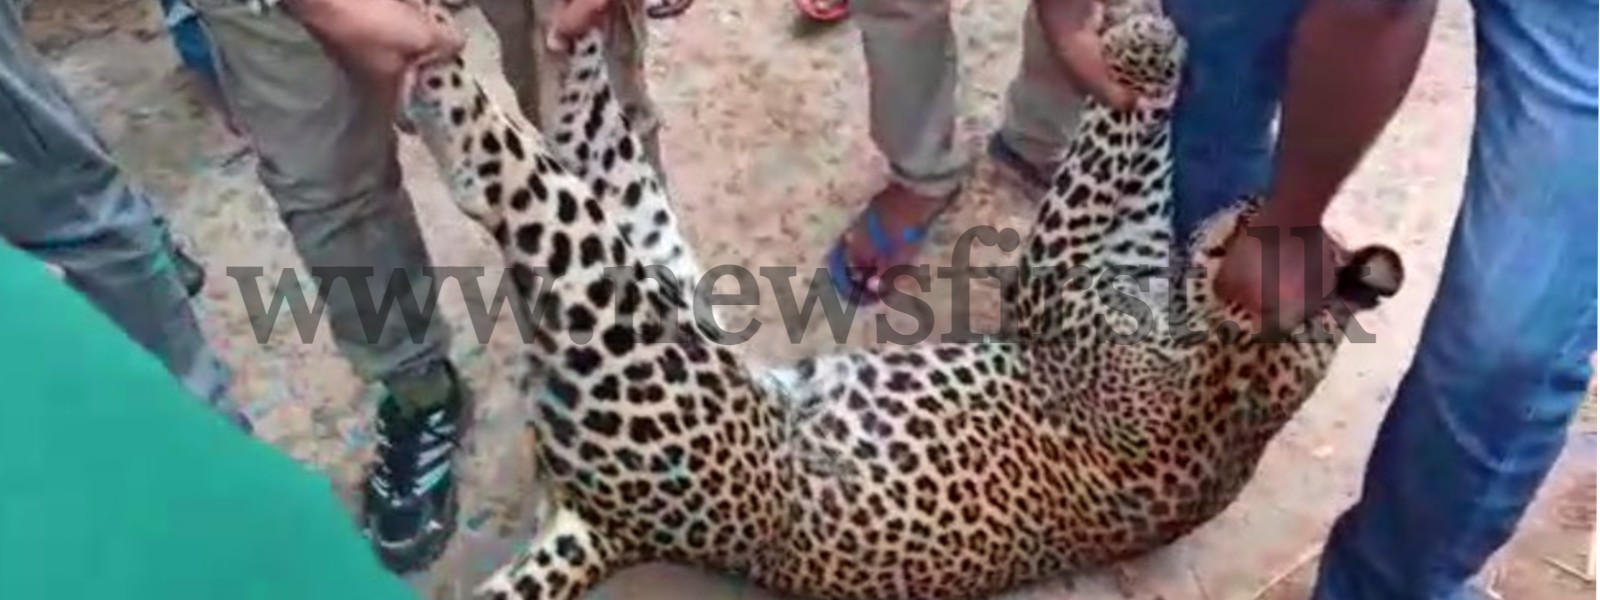 Leopard found dead trapped in a snare in Hasalaka